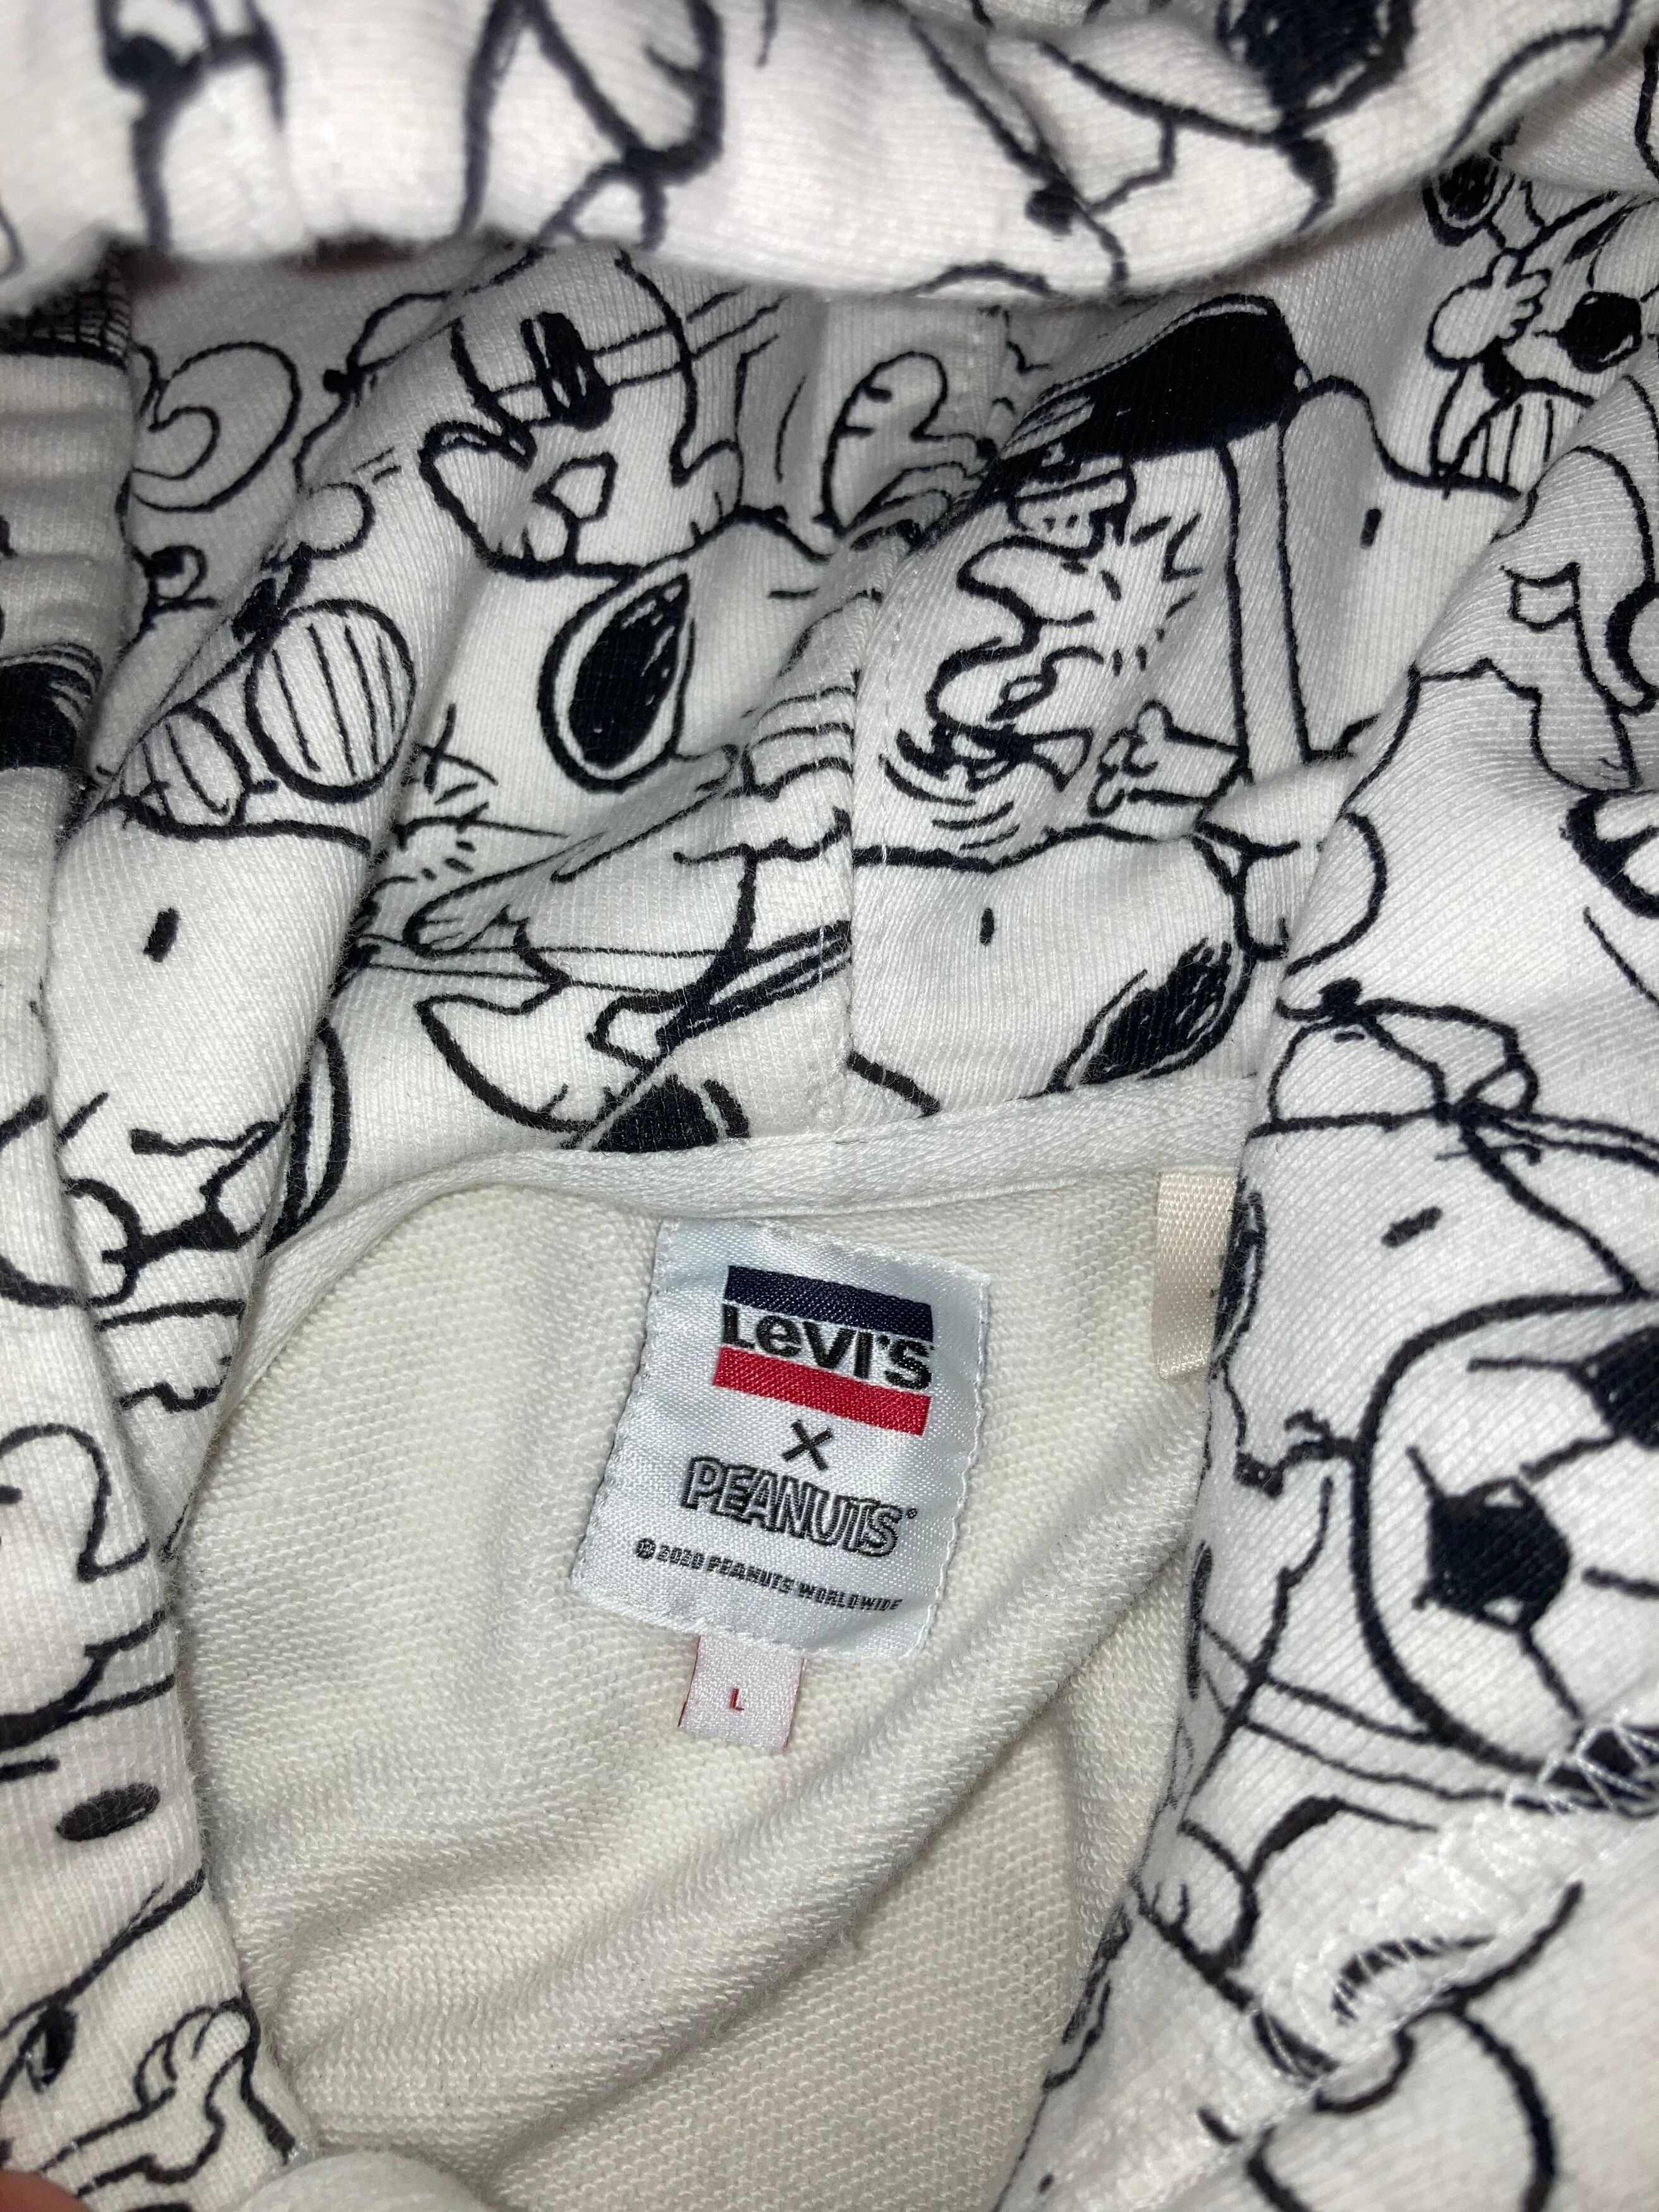 Levi's Levi's x Peanuts Snoopy Graphic Hoodie Size US L / EU 52-54 / 3 - 3 Preview